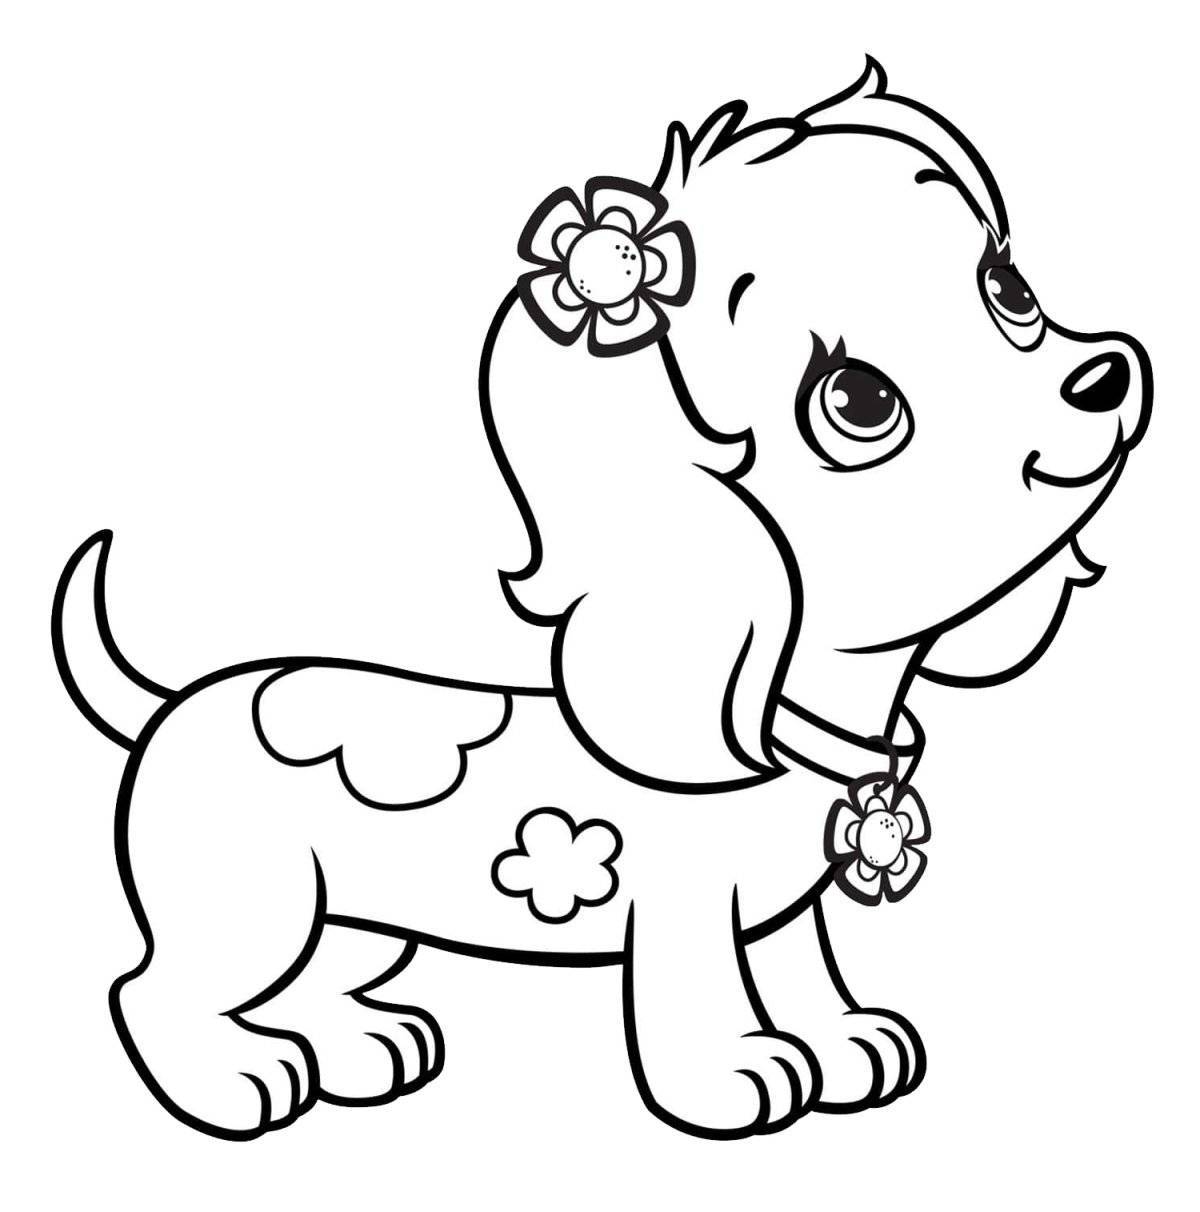 Cute coloring pages dogs kittens for kids